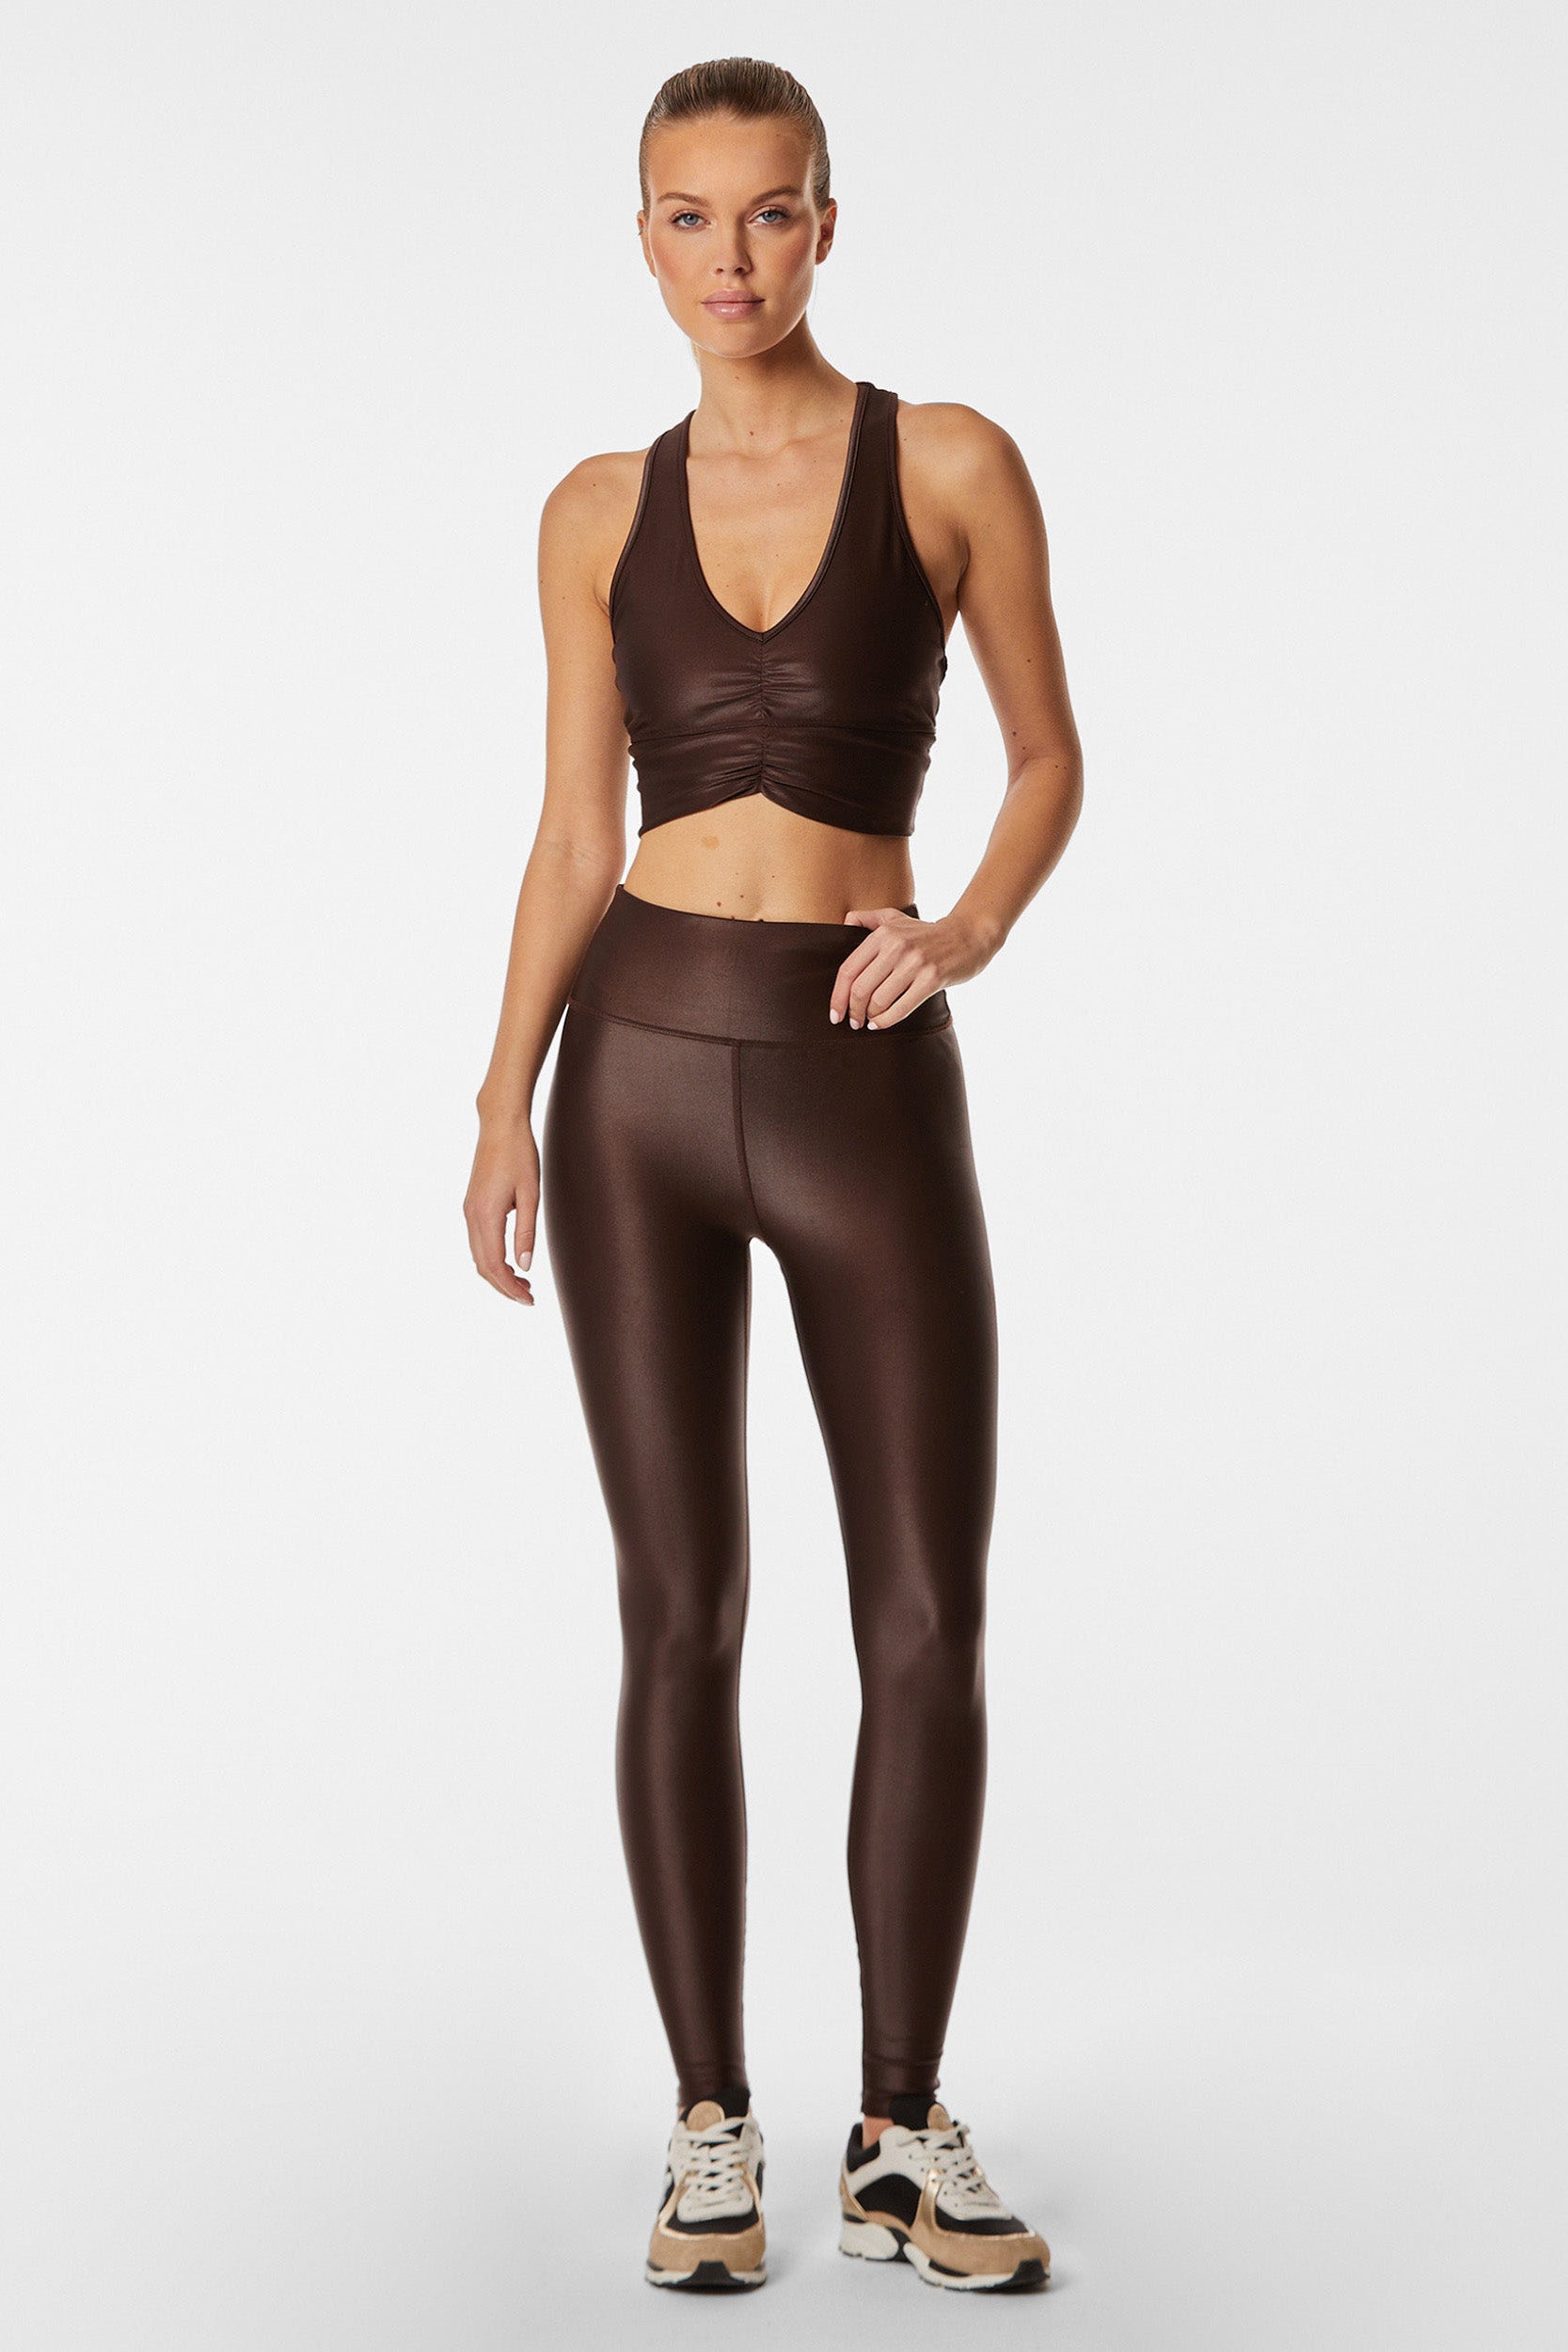 A person standing against a plain white background is wearing an espresso brown sports bra with a ruched front and matching Liquid Leggings - Espresso. They have on black, white, and beige sneakers. Their hair is tied back in a sleek bun, and they have a neutral facial expression.